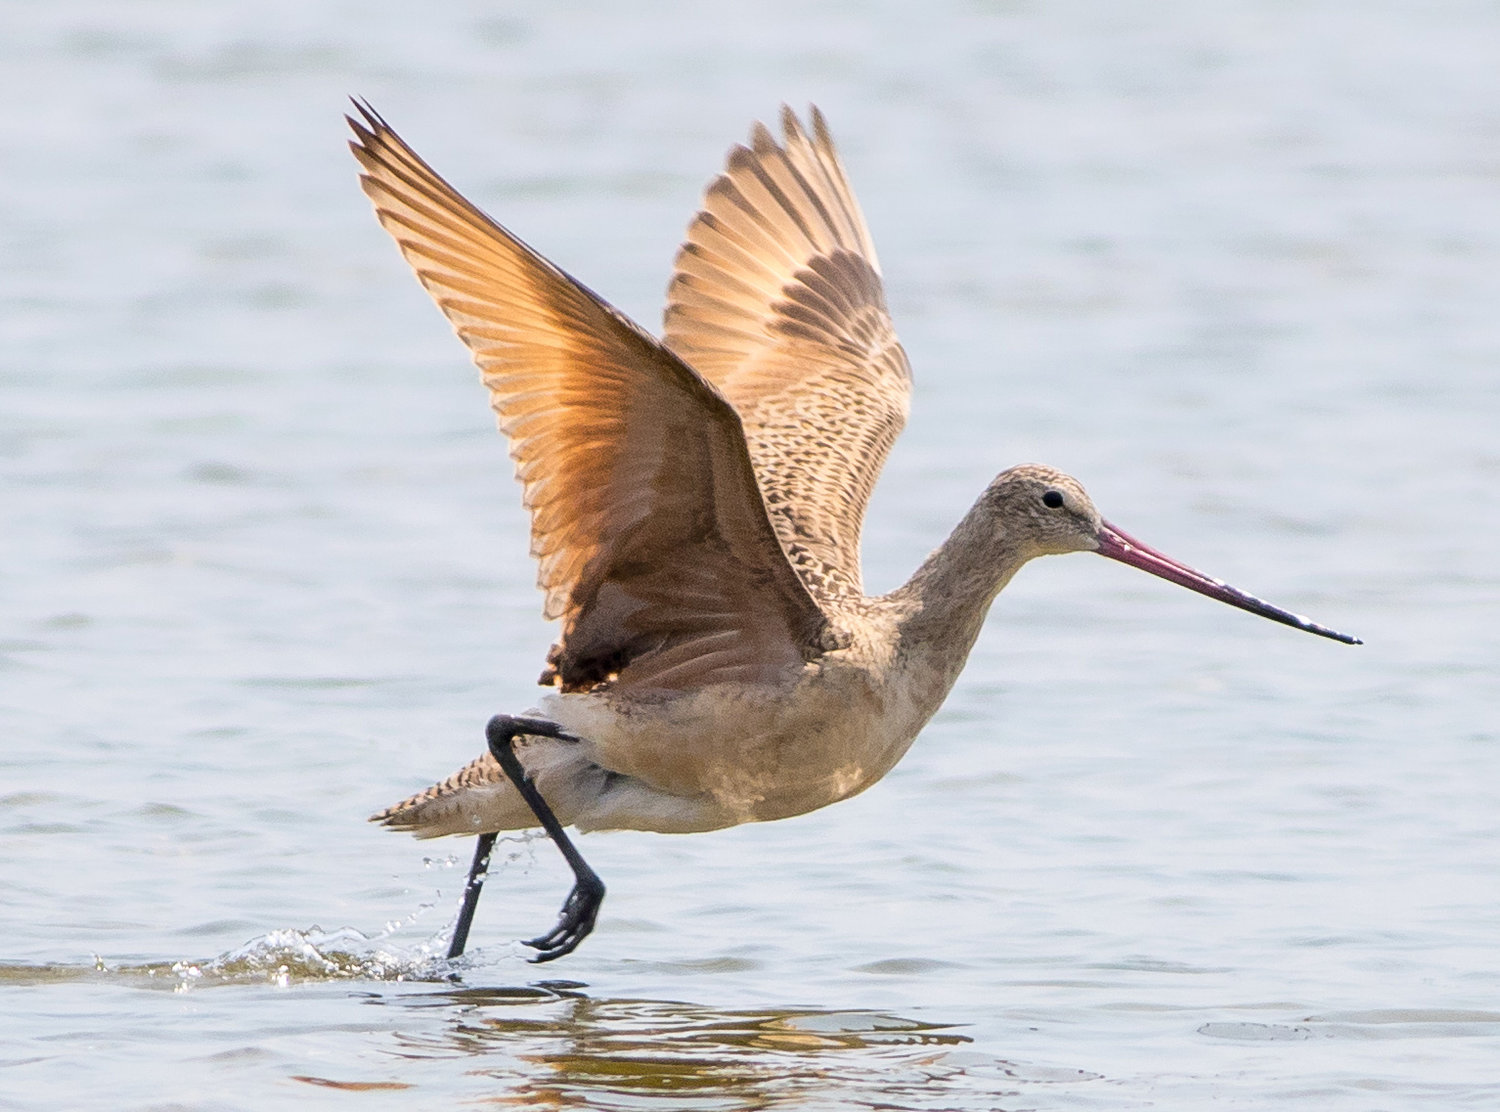 Two Marbled Godwits like this one delighted observers at Smith's Point on Friday.